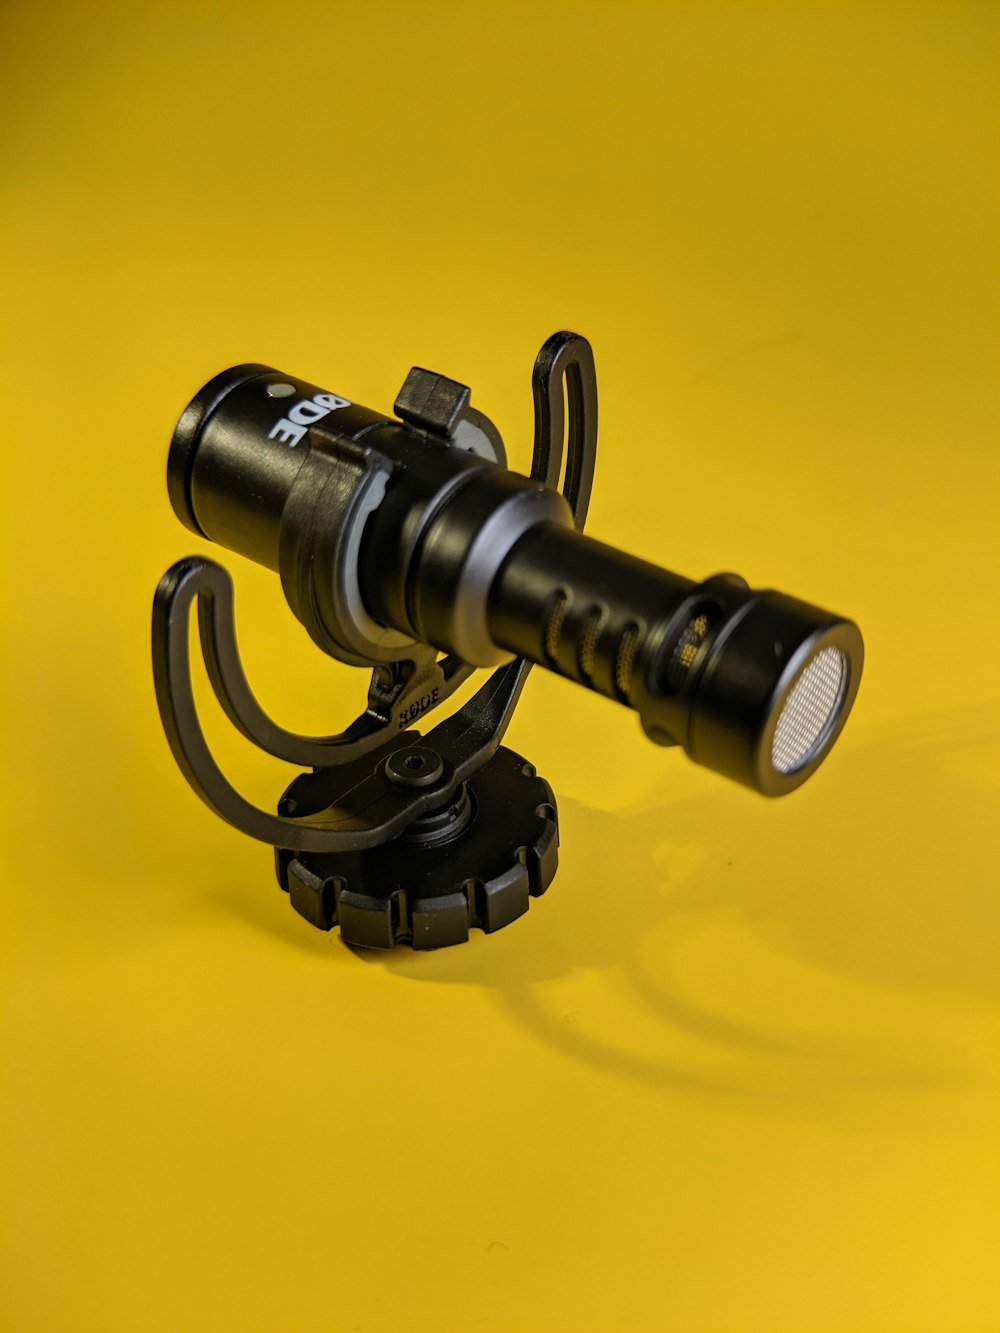 a close up of a flashlight on a yellow background